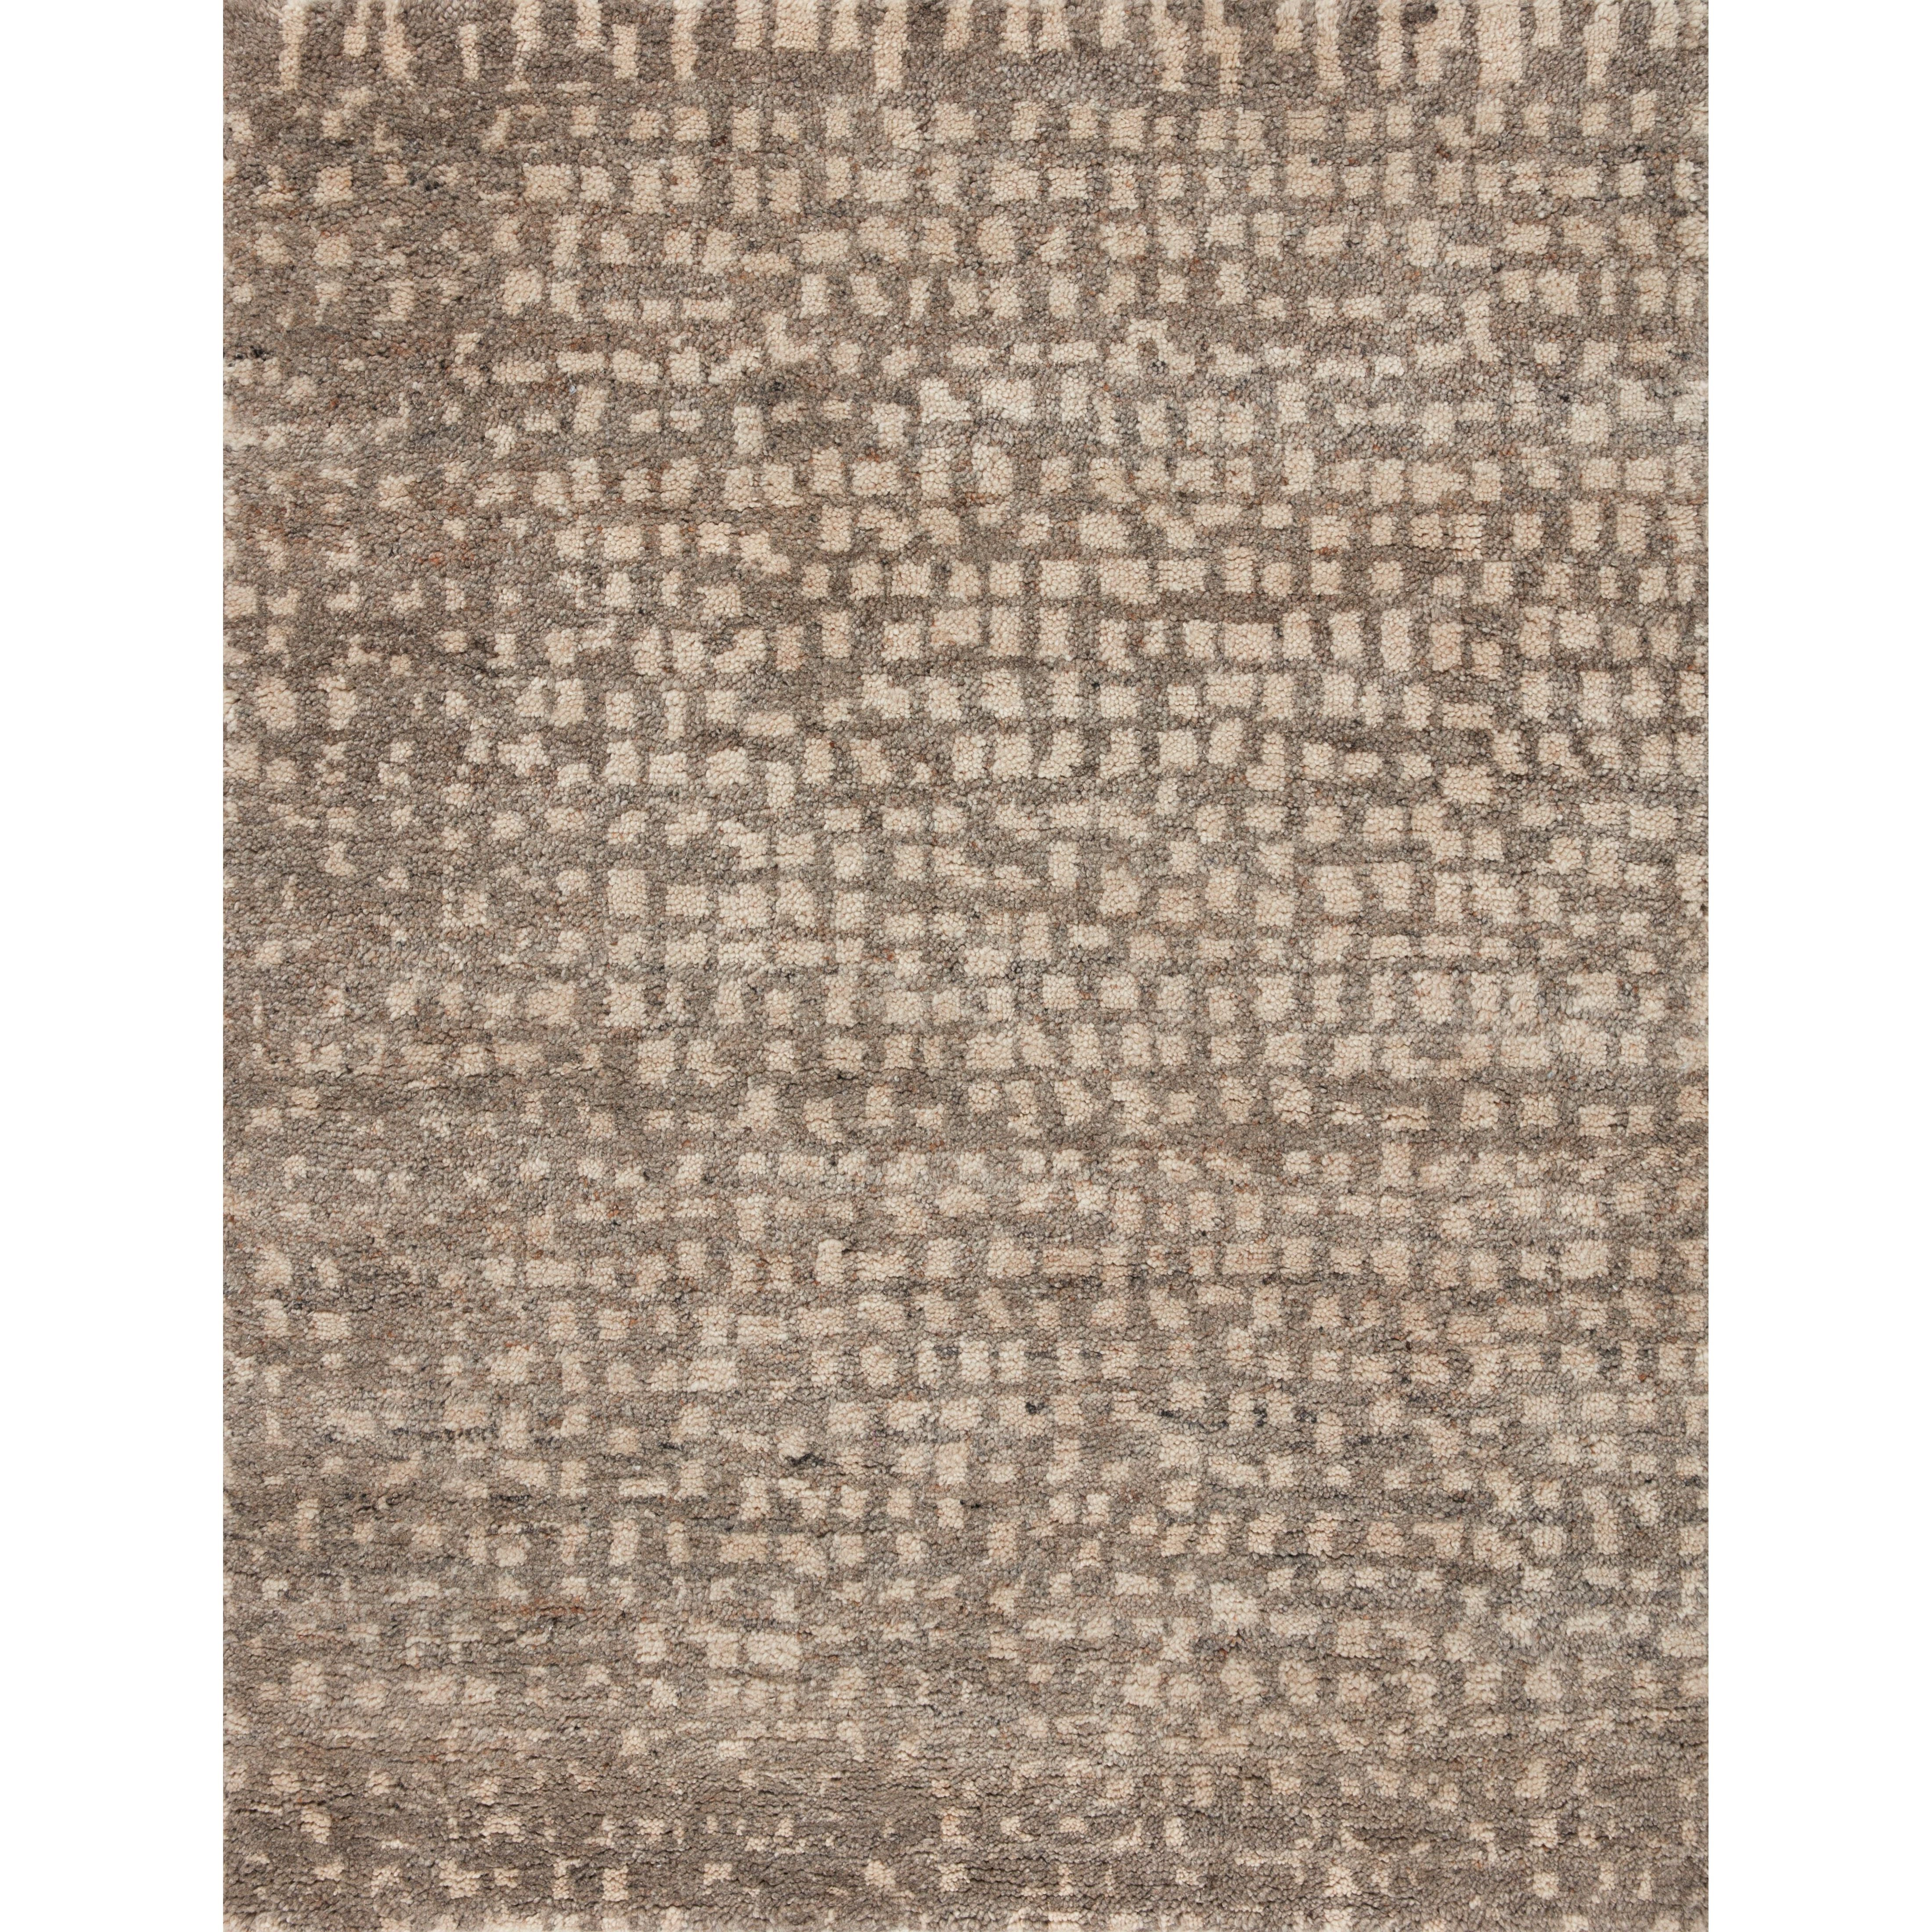 The Libby Collection is a modern Moroccan-style area rug with a super chunky, hand-knotted pile, designed by Amber Lewis x Loloi. This collection includes designs with broken stripes, tiled geometrics, and block print motifs that add easy dimension to living rooms, bedrooms, and more. Amethyst Home provides interior design, new construction, custom furniture, and area rugs in the Tampa metro area.